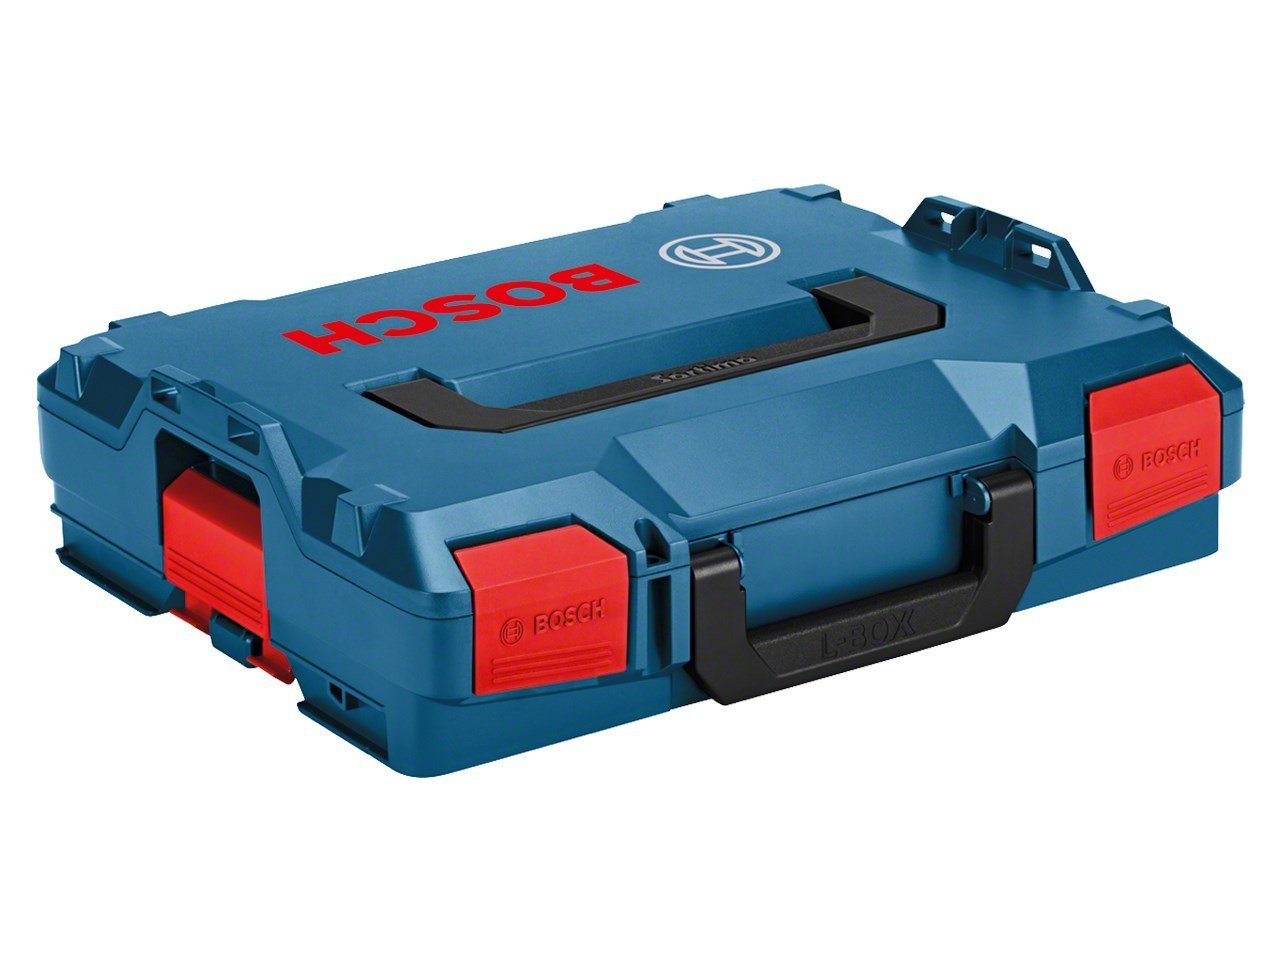 Cases for power tools